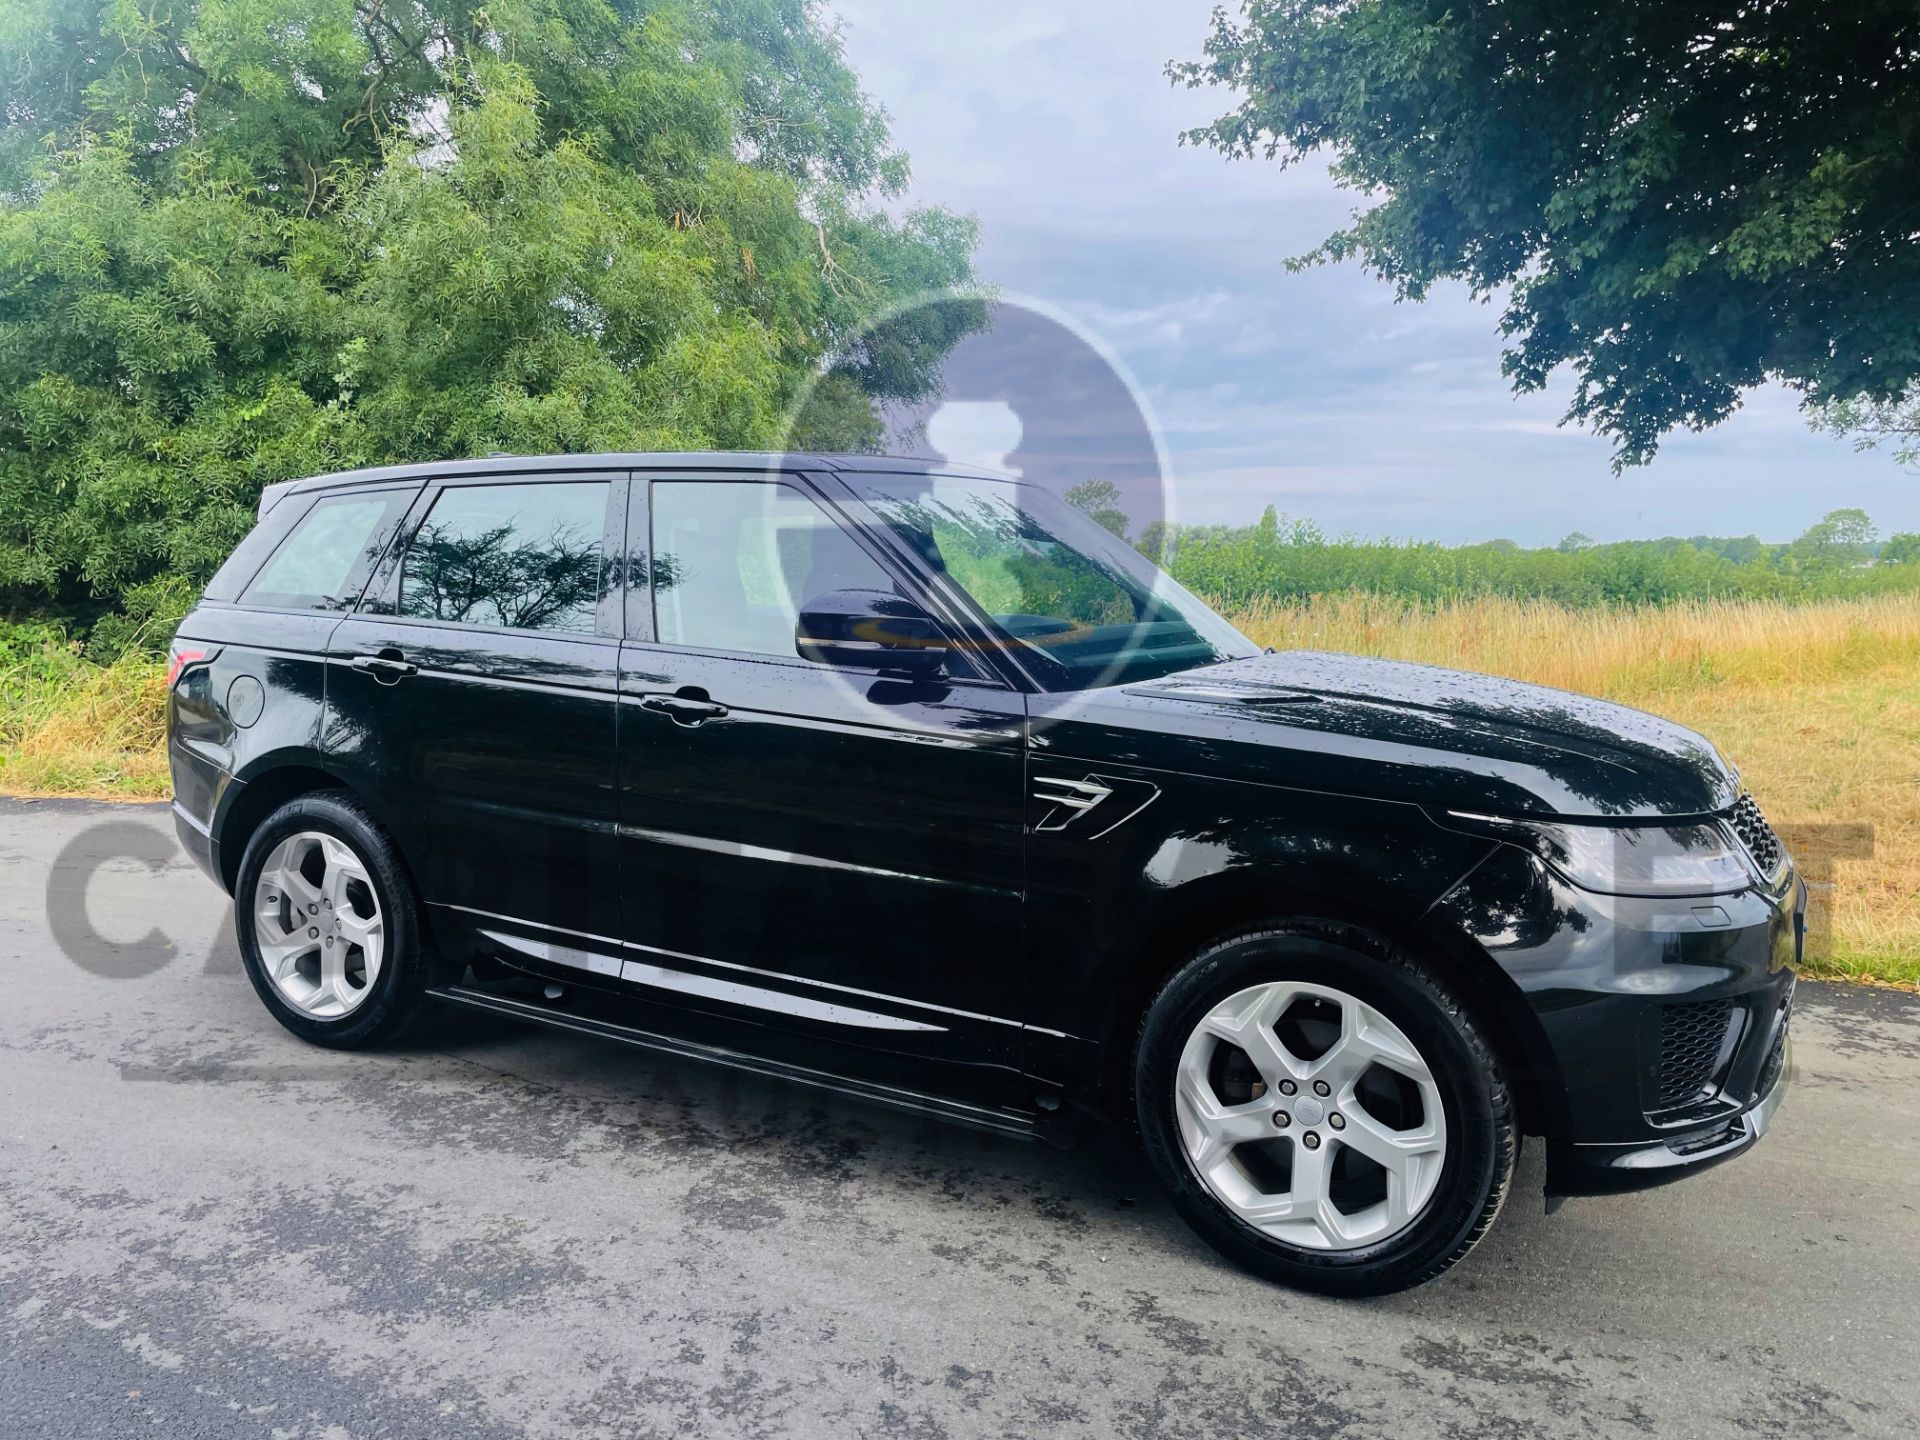 (On Sale) RANGE ROVER SPORT *HSE EDITION* SUV (2018 - NEW MODEL) EURO 6 DIESEL - 8 SPEED AUTOMATIC